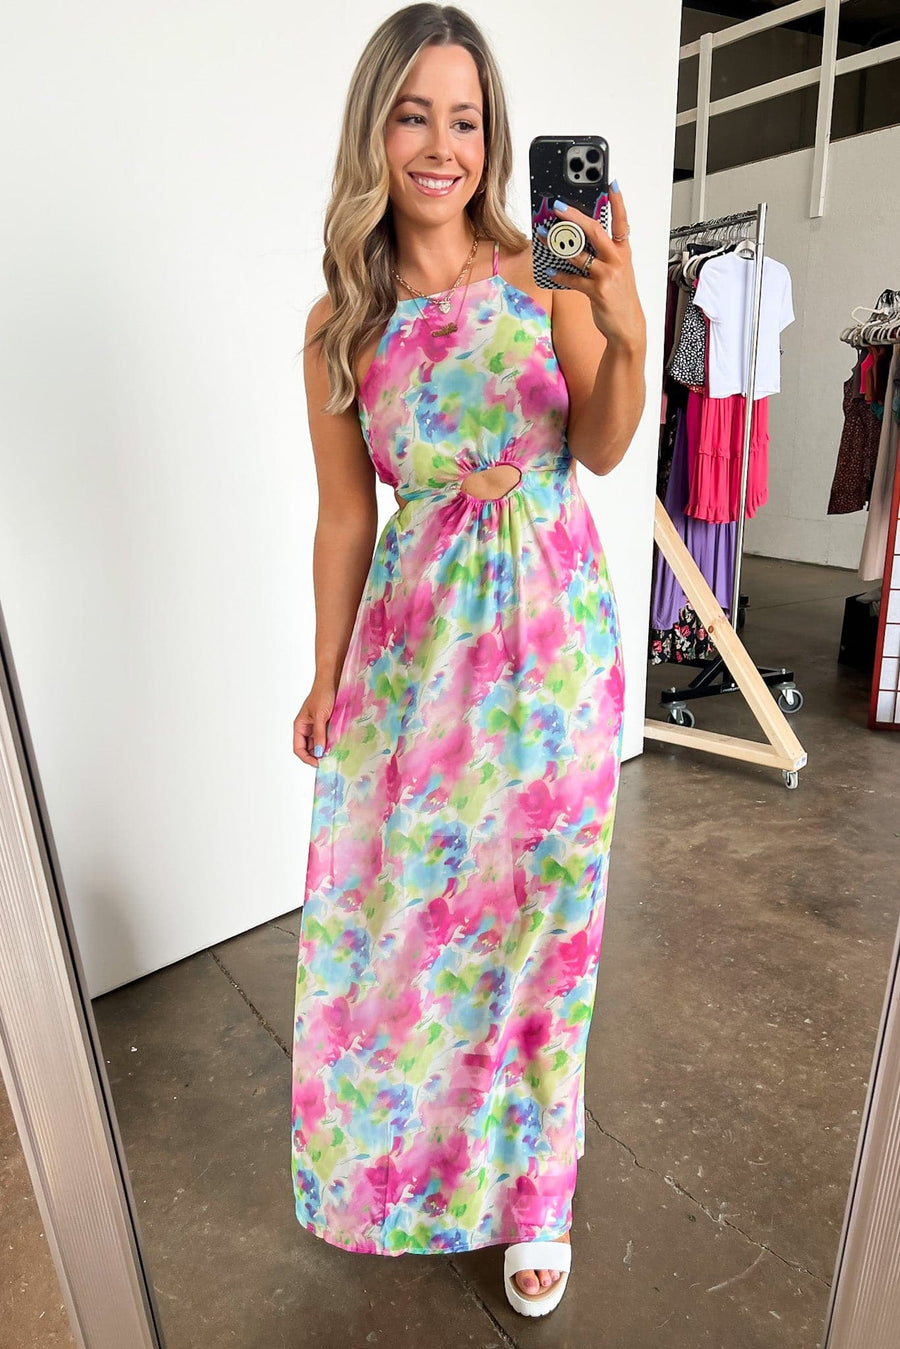  Looking so Flirty Floral Cutout Maxi Dress - FINAL SALE - Madison and Mallory